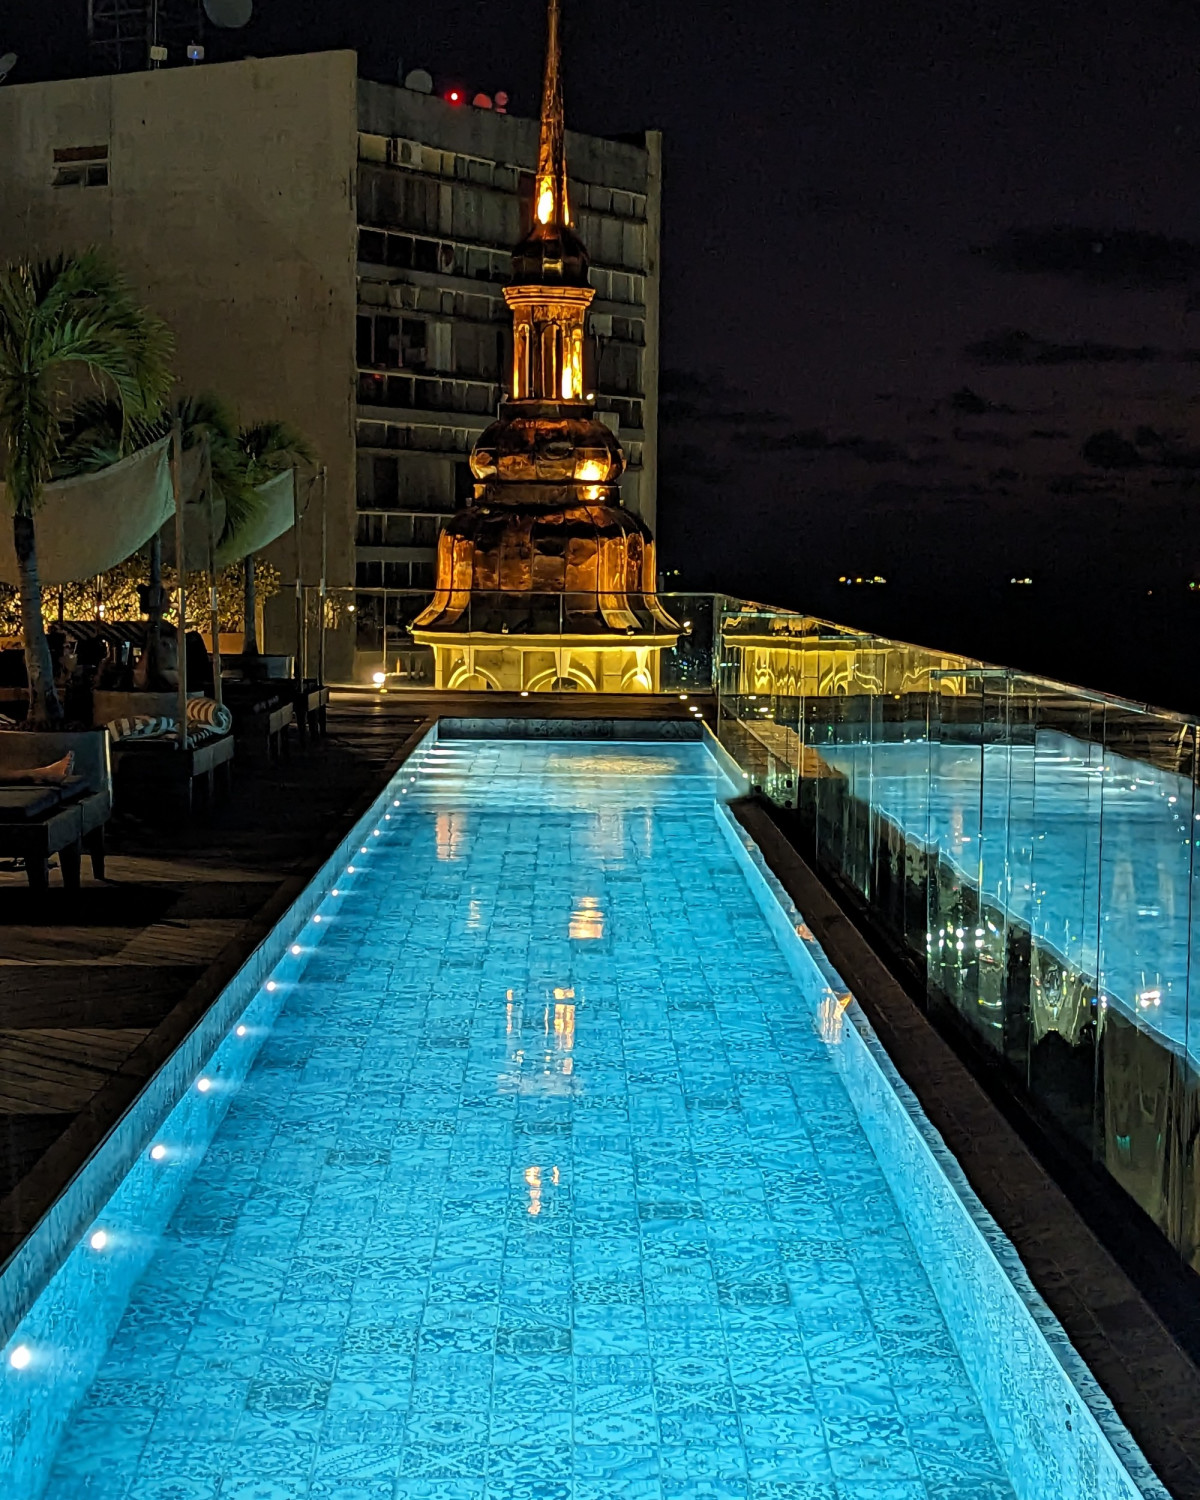 View of the pool